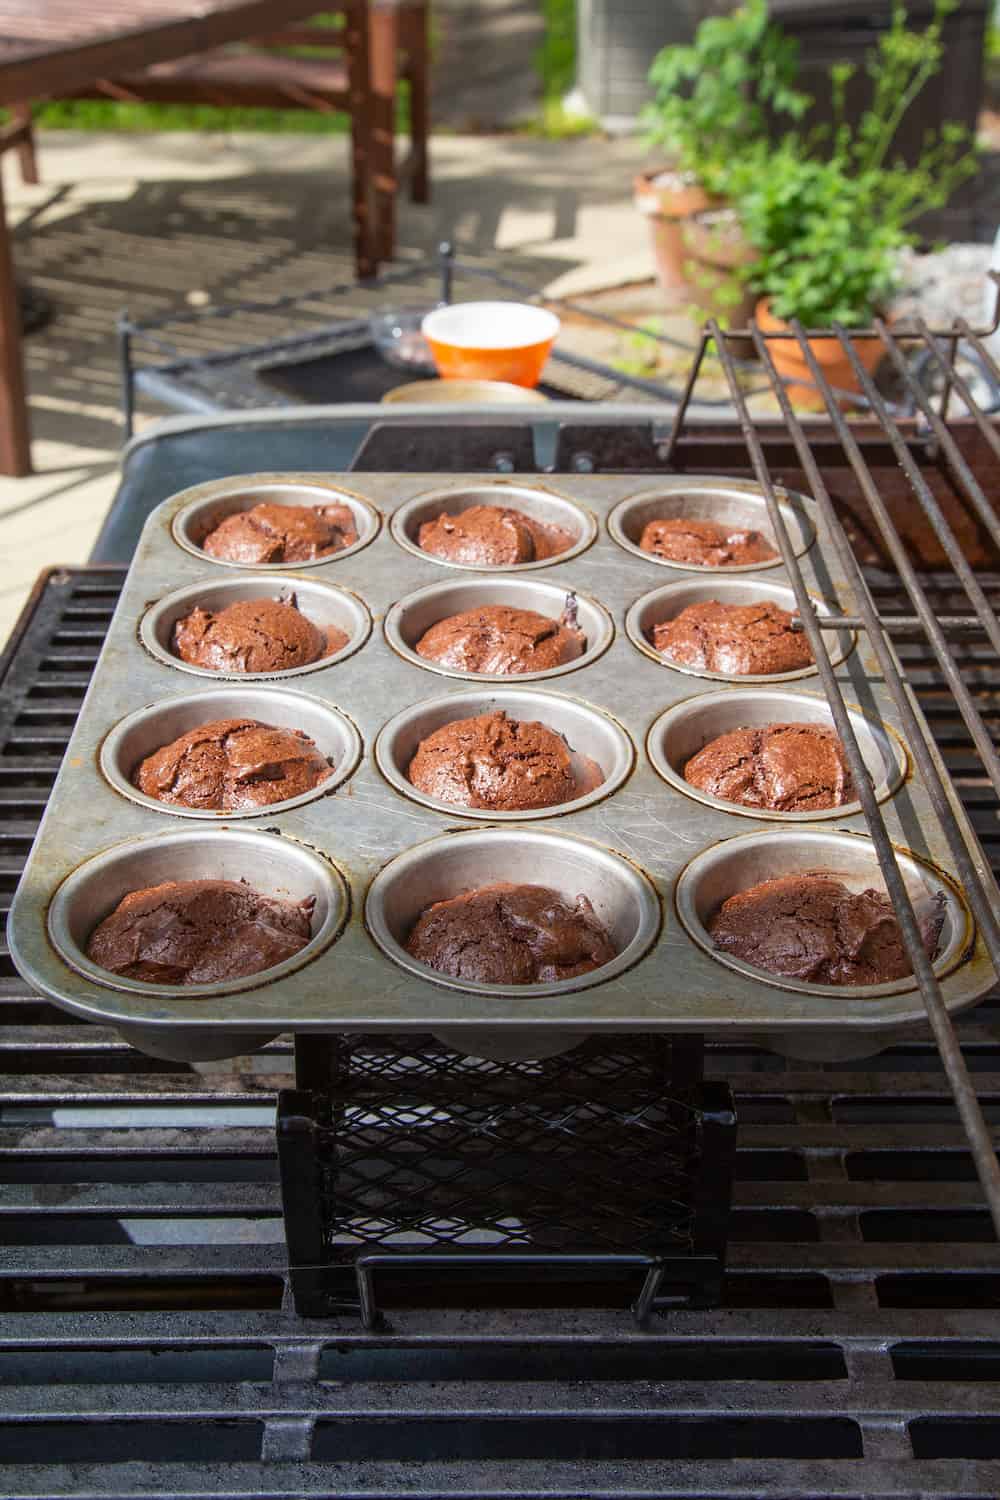 Baking on the Grill: Cookies, Brownies, Cakes, and More!